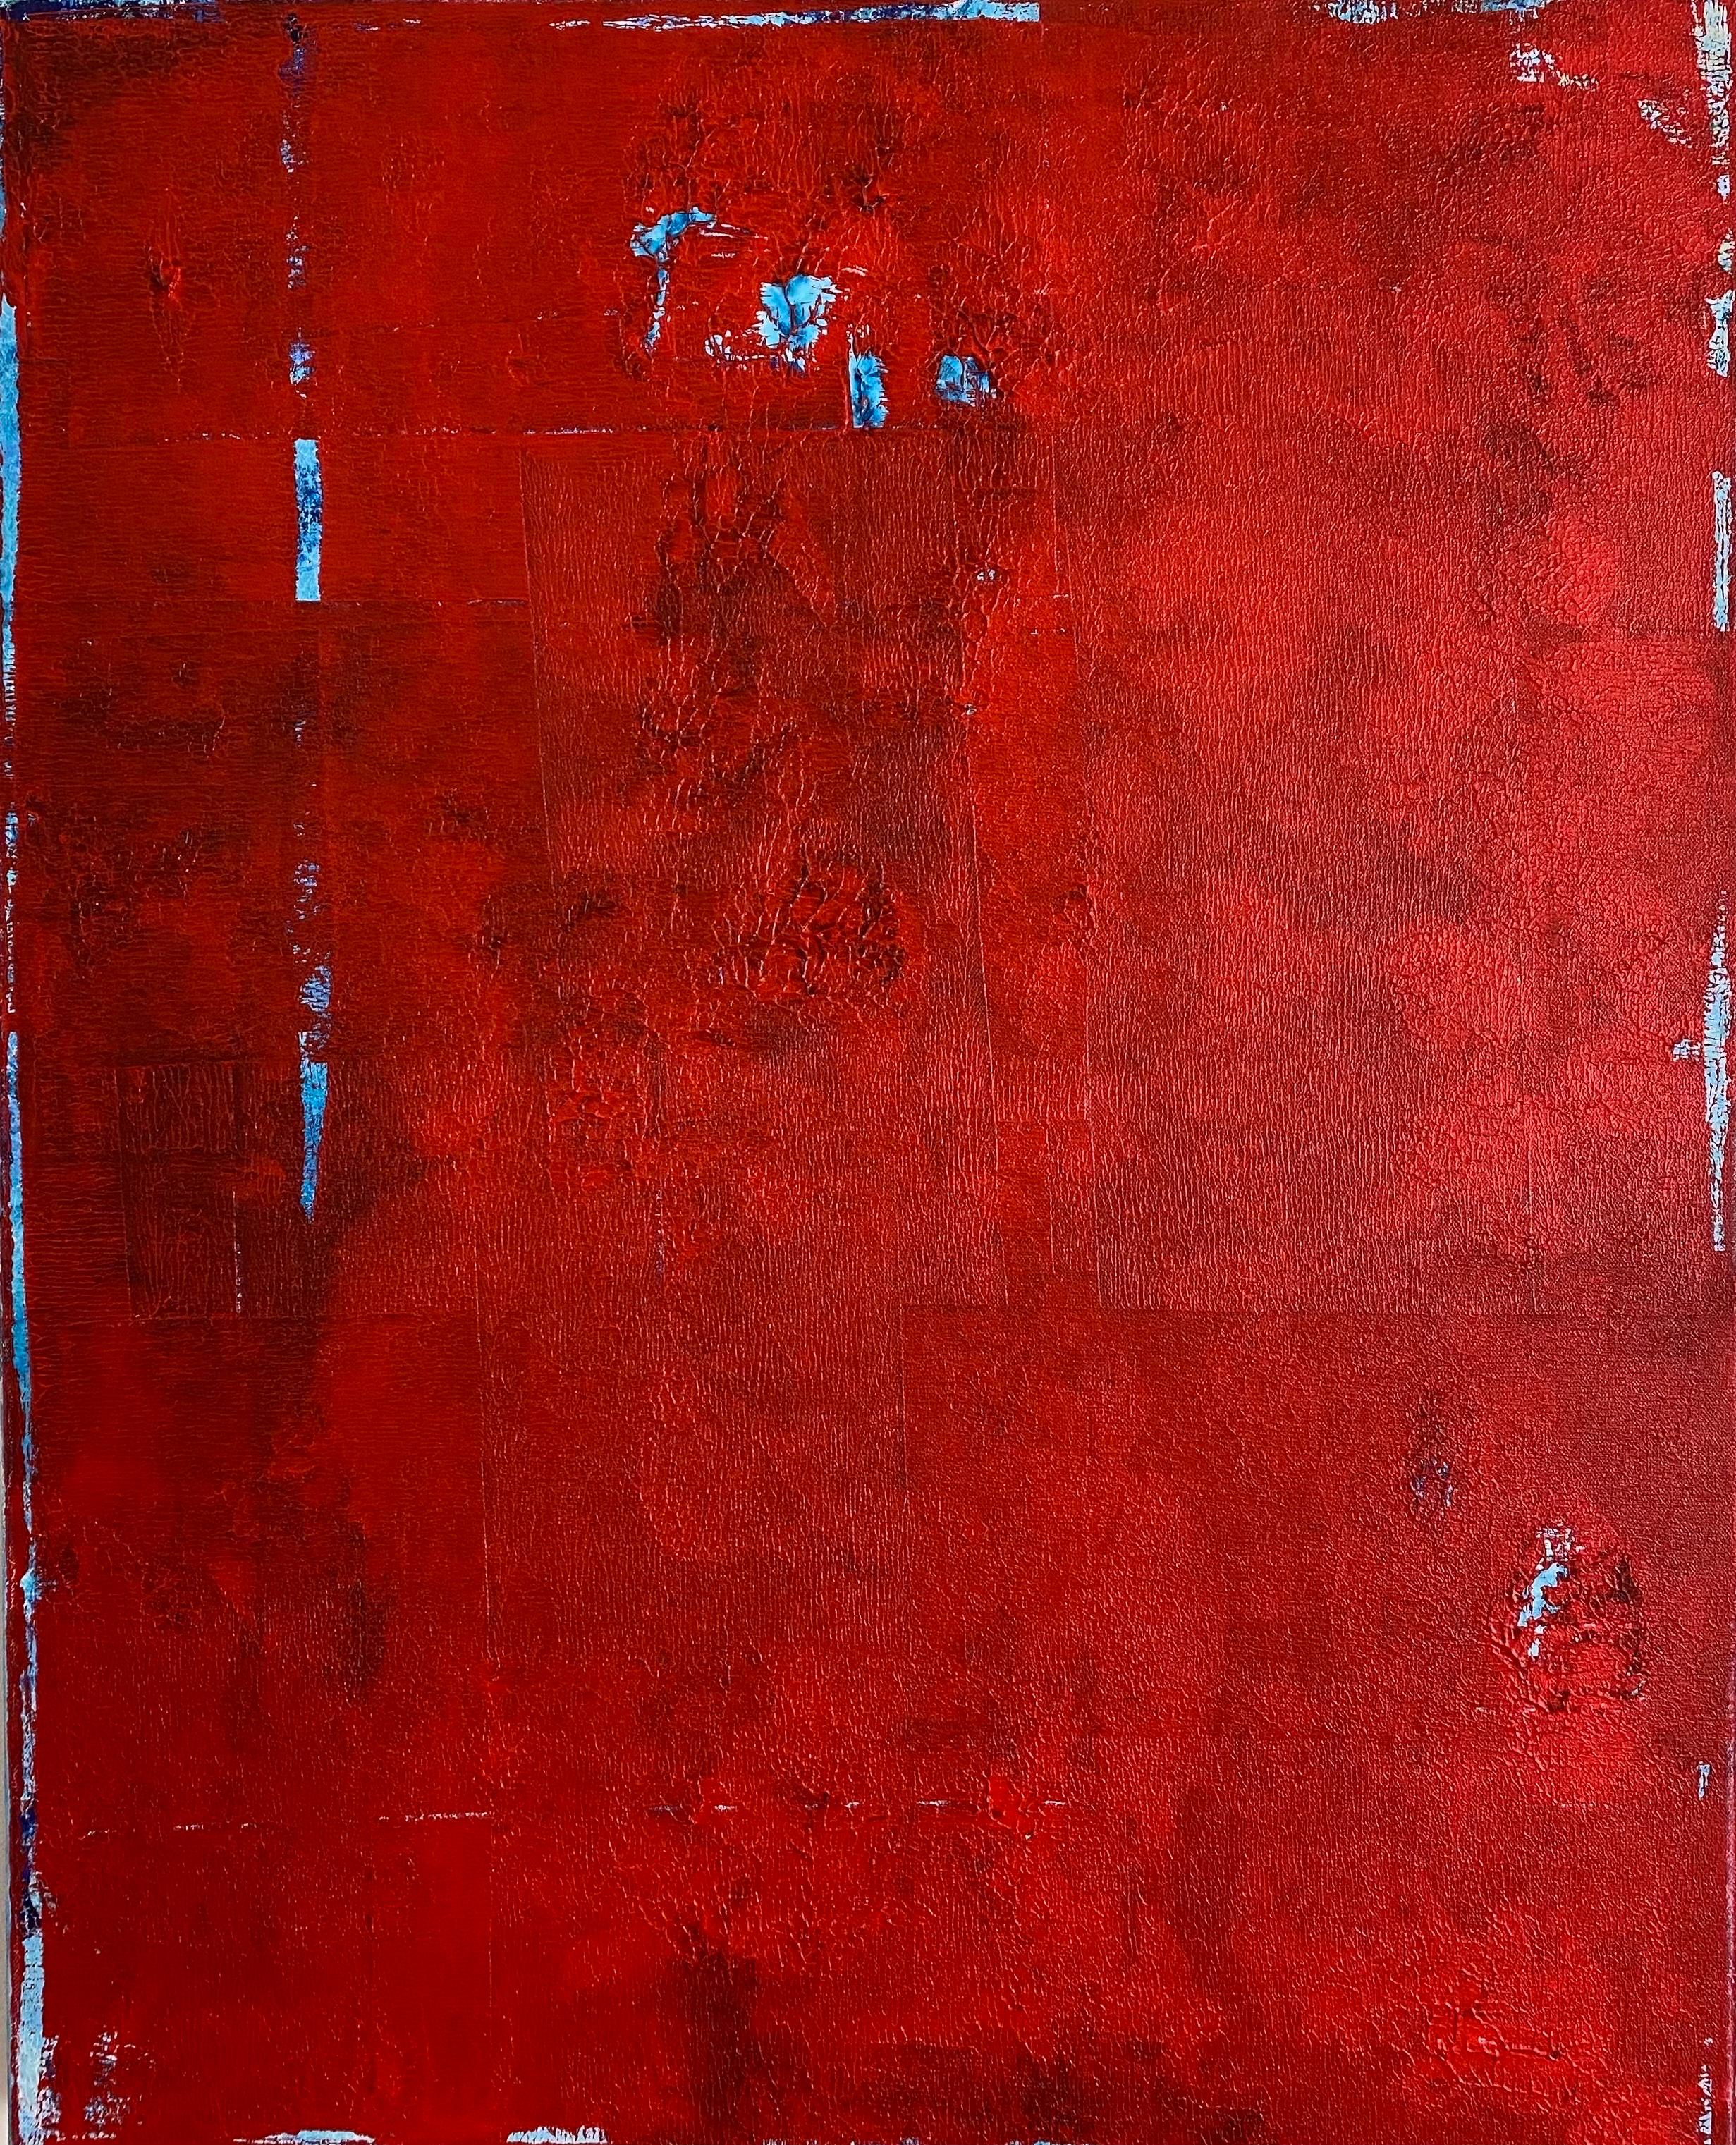 Painted Red Contemporary Abstract Painting Titled 